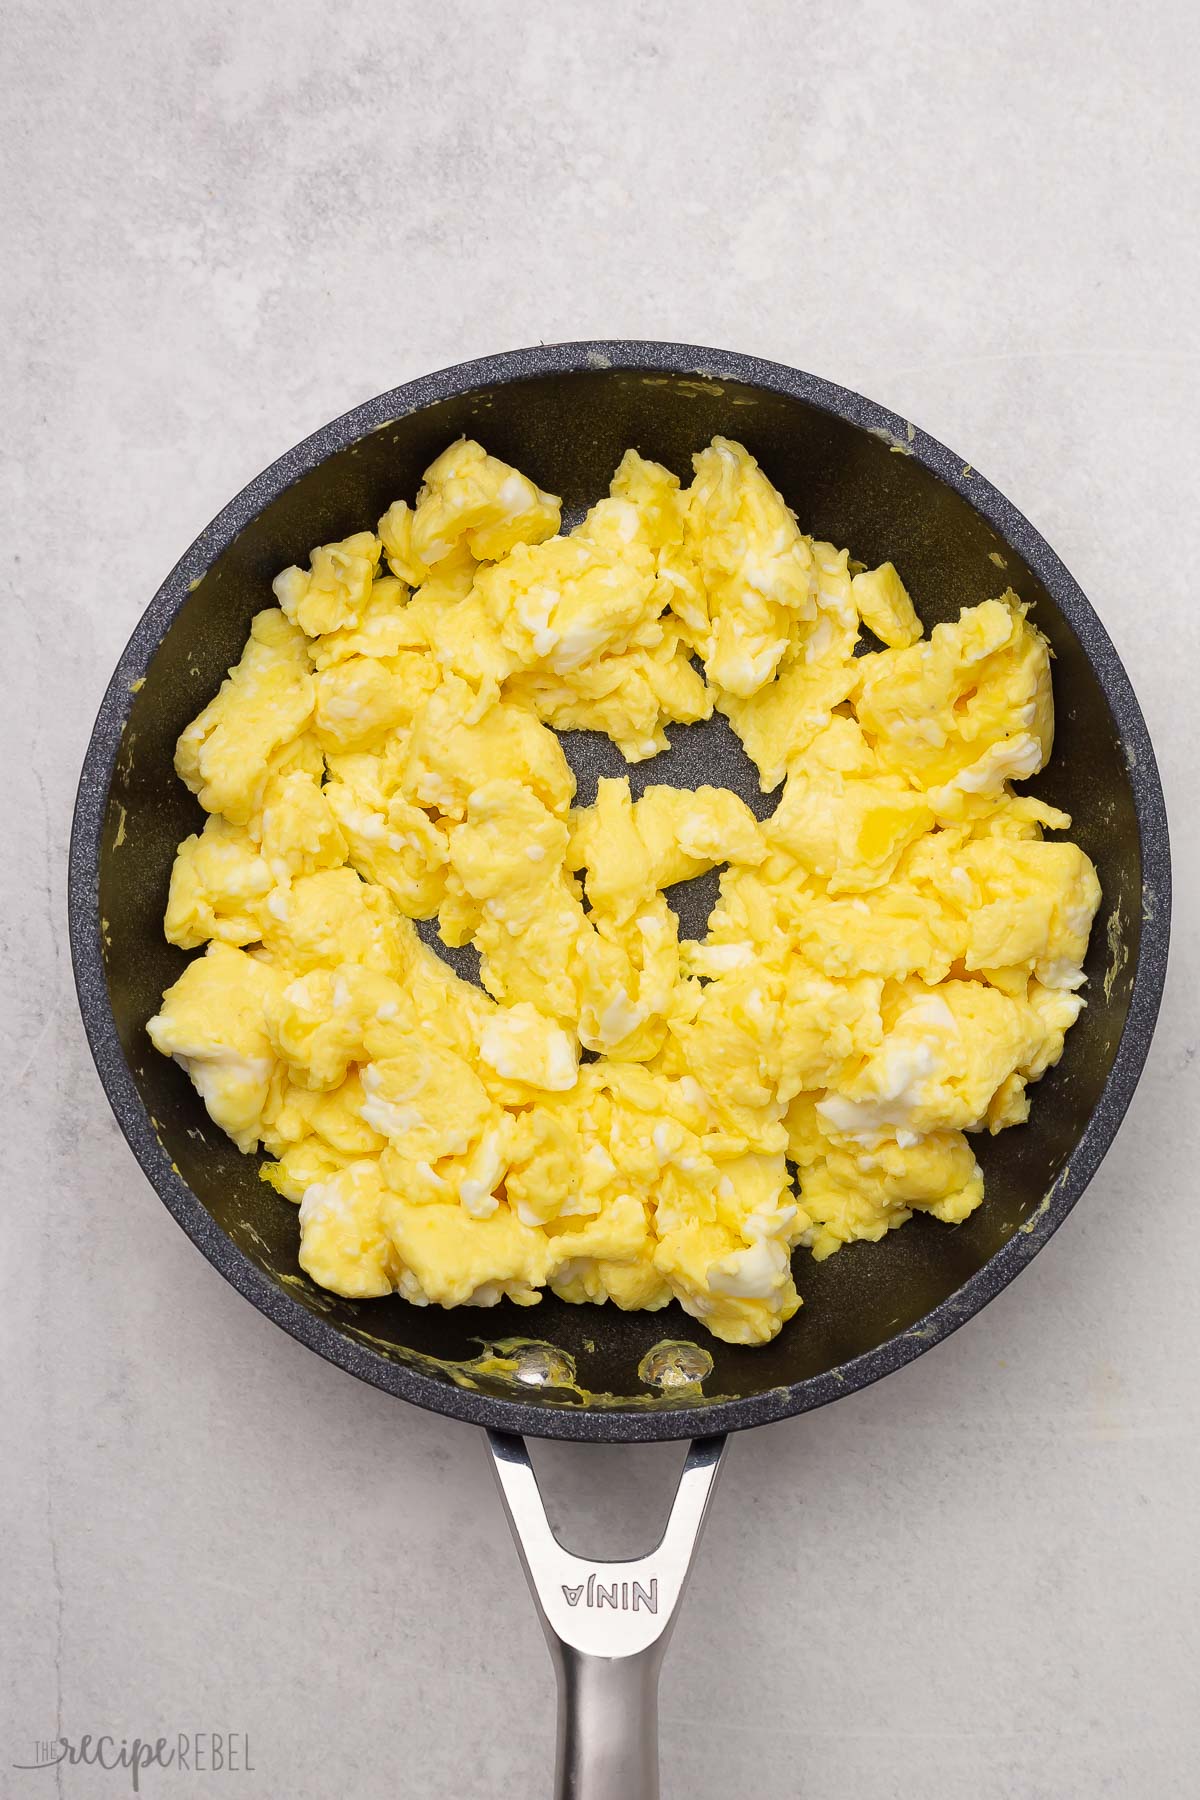 Top view of scrambled eggs in a black frying pan.